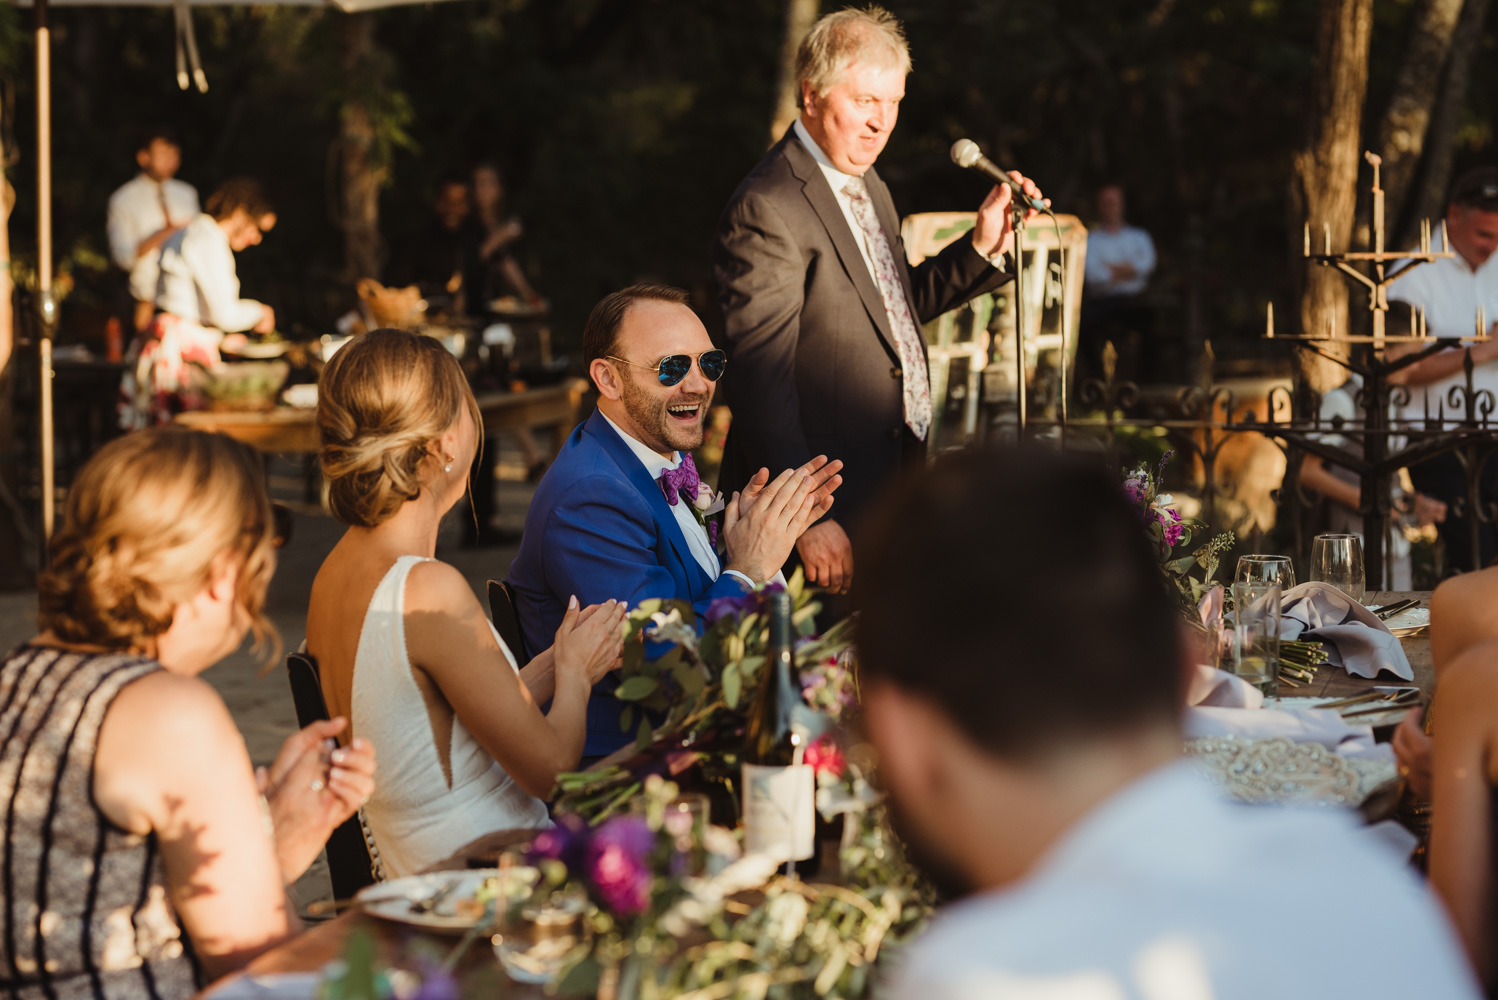 Triple S Ranch Wedding Venue, groom laughing during toasts photo